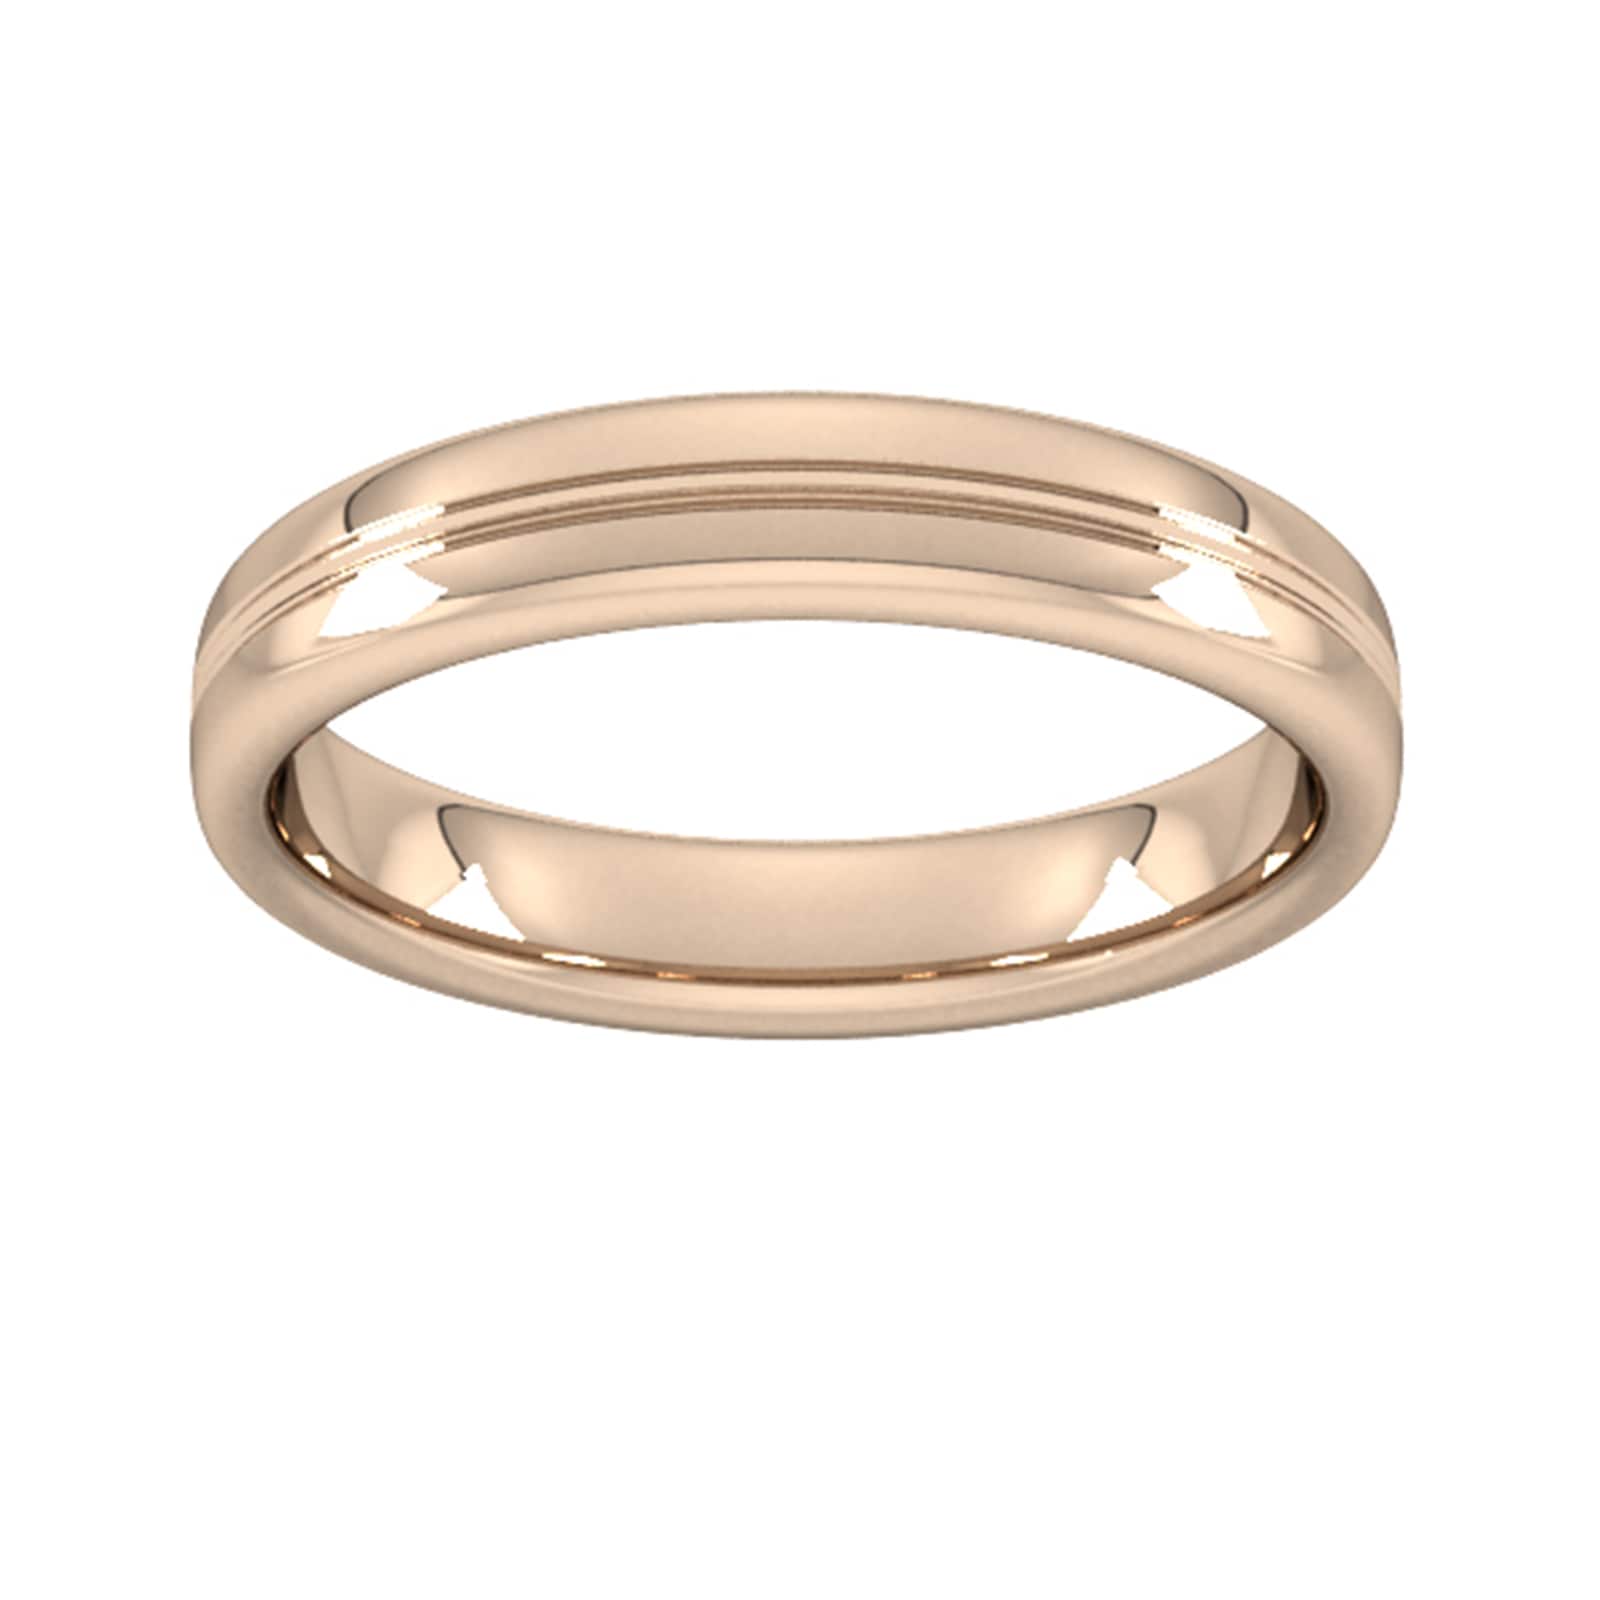 4mm Slight Court Heavy Grooved Polished Finish Wedding Ring In 9 Carat Rose Gold - Ring Size V